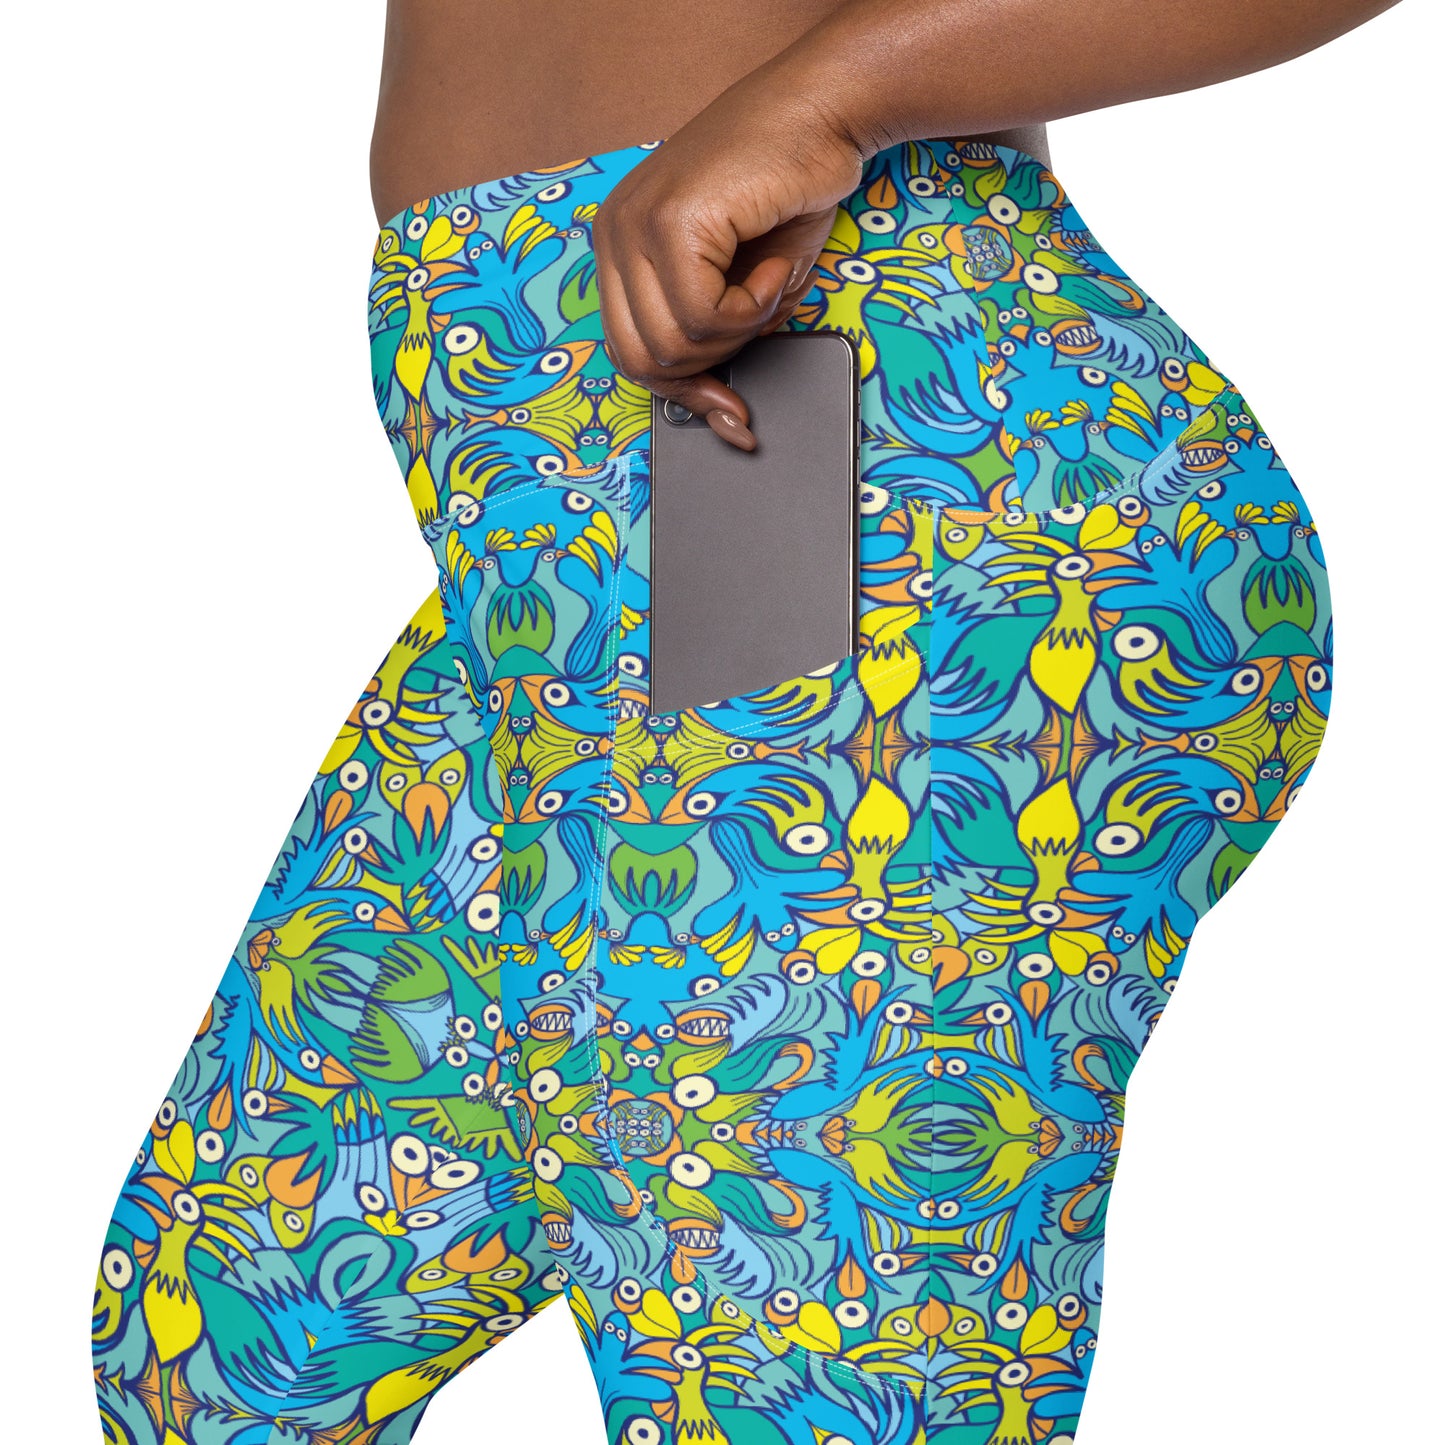 Exotic birds tropical pattern Crossover leggings with pockets. Pocket detail